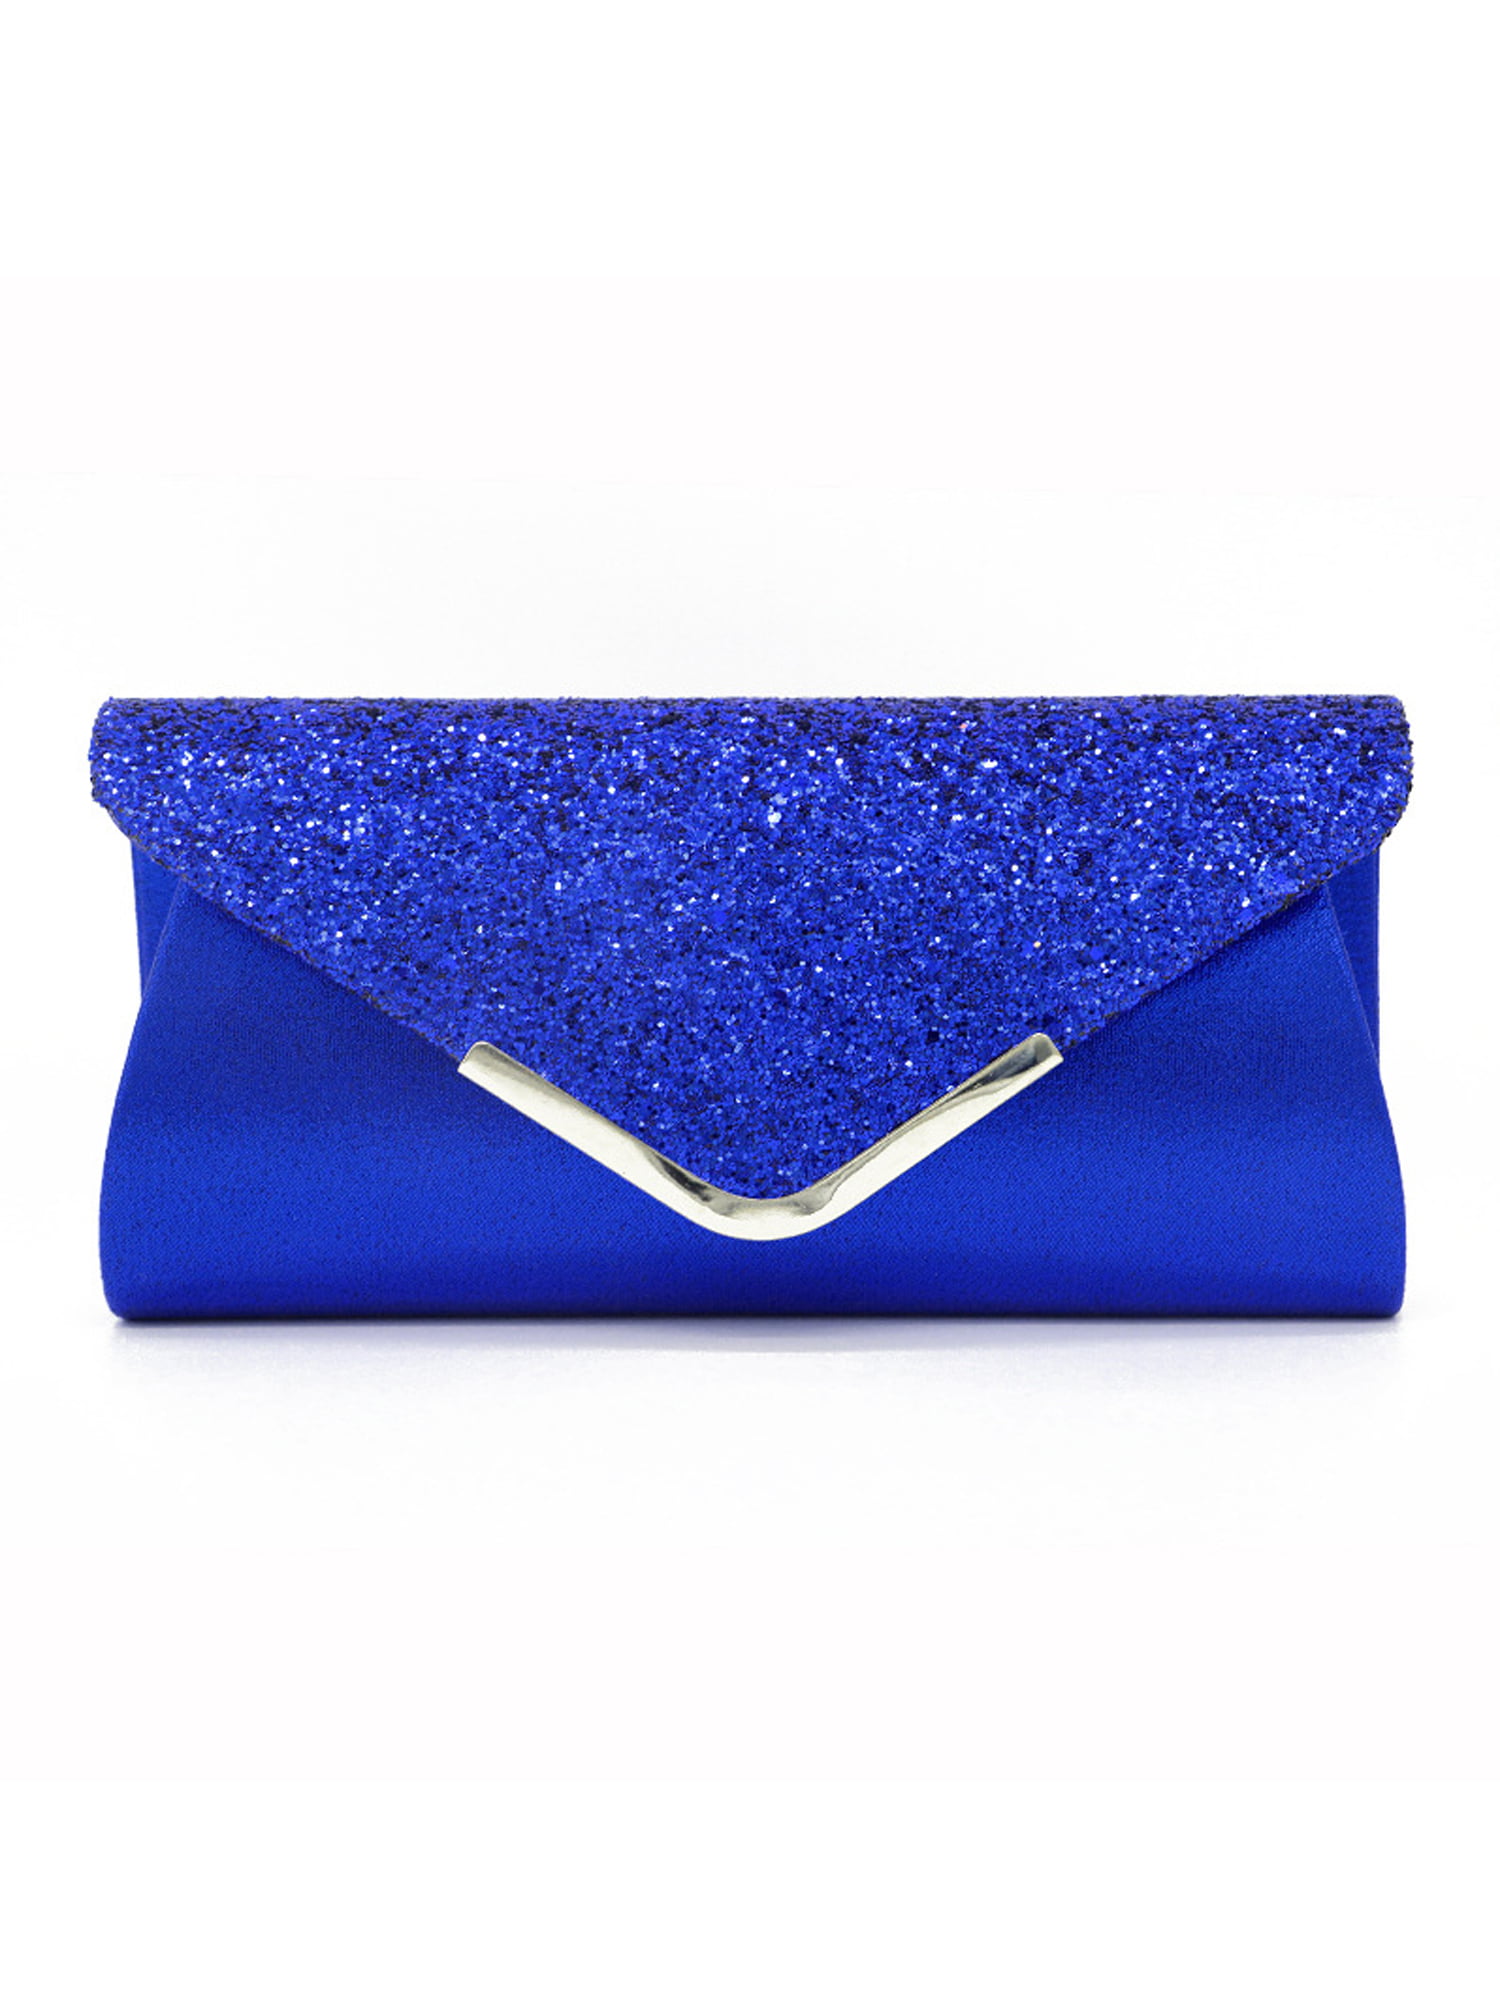 Glitter Faux Leather Envelope Evening Clutch Bag Wedding Prom Party Womens Purse 